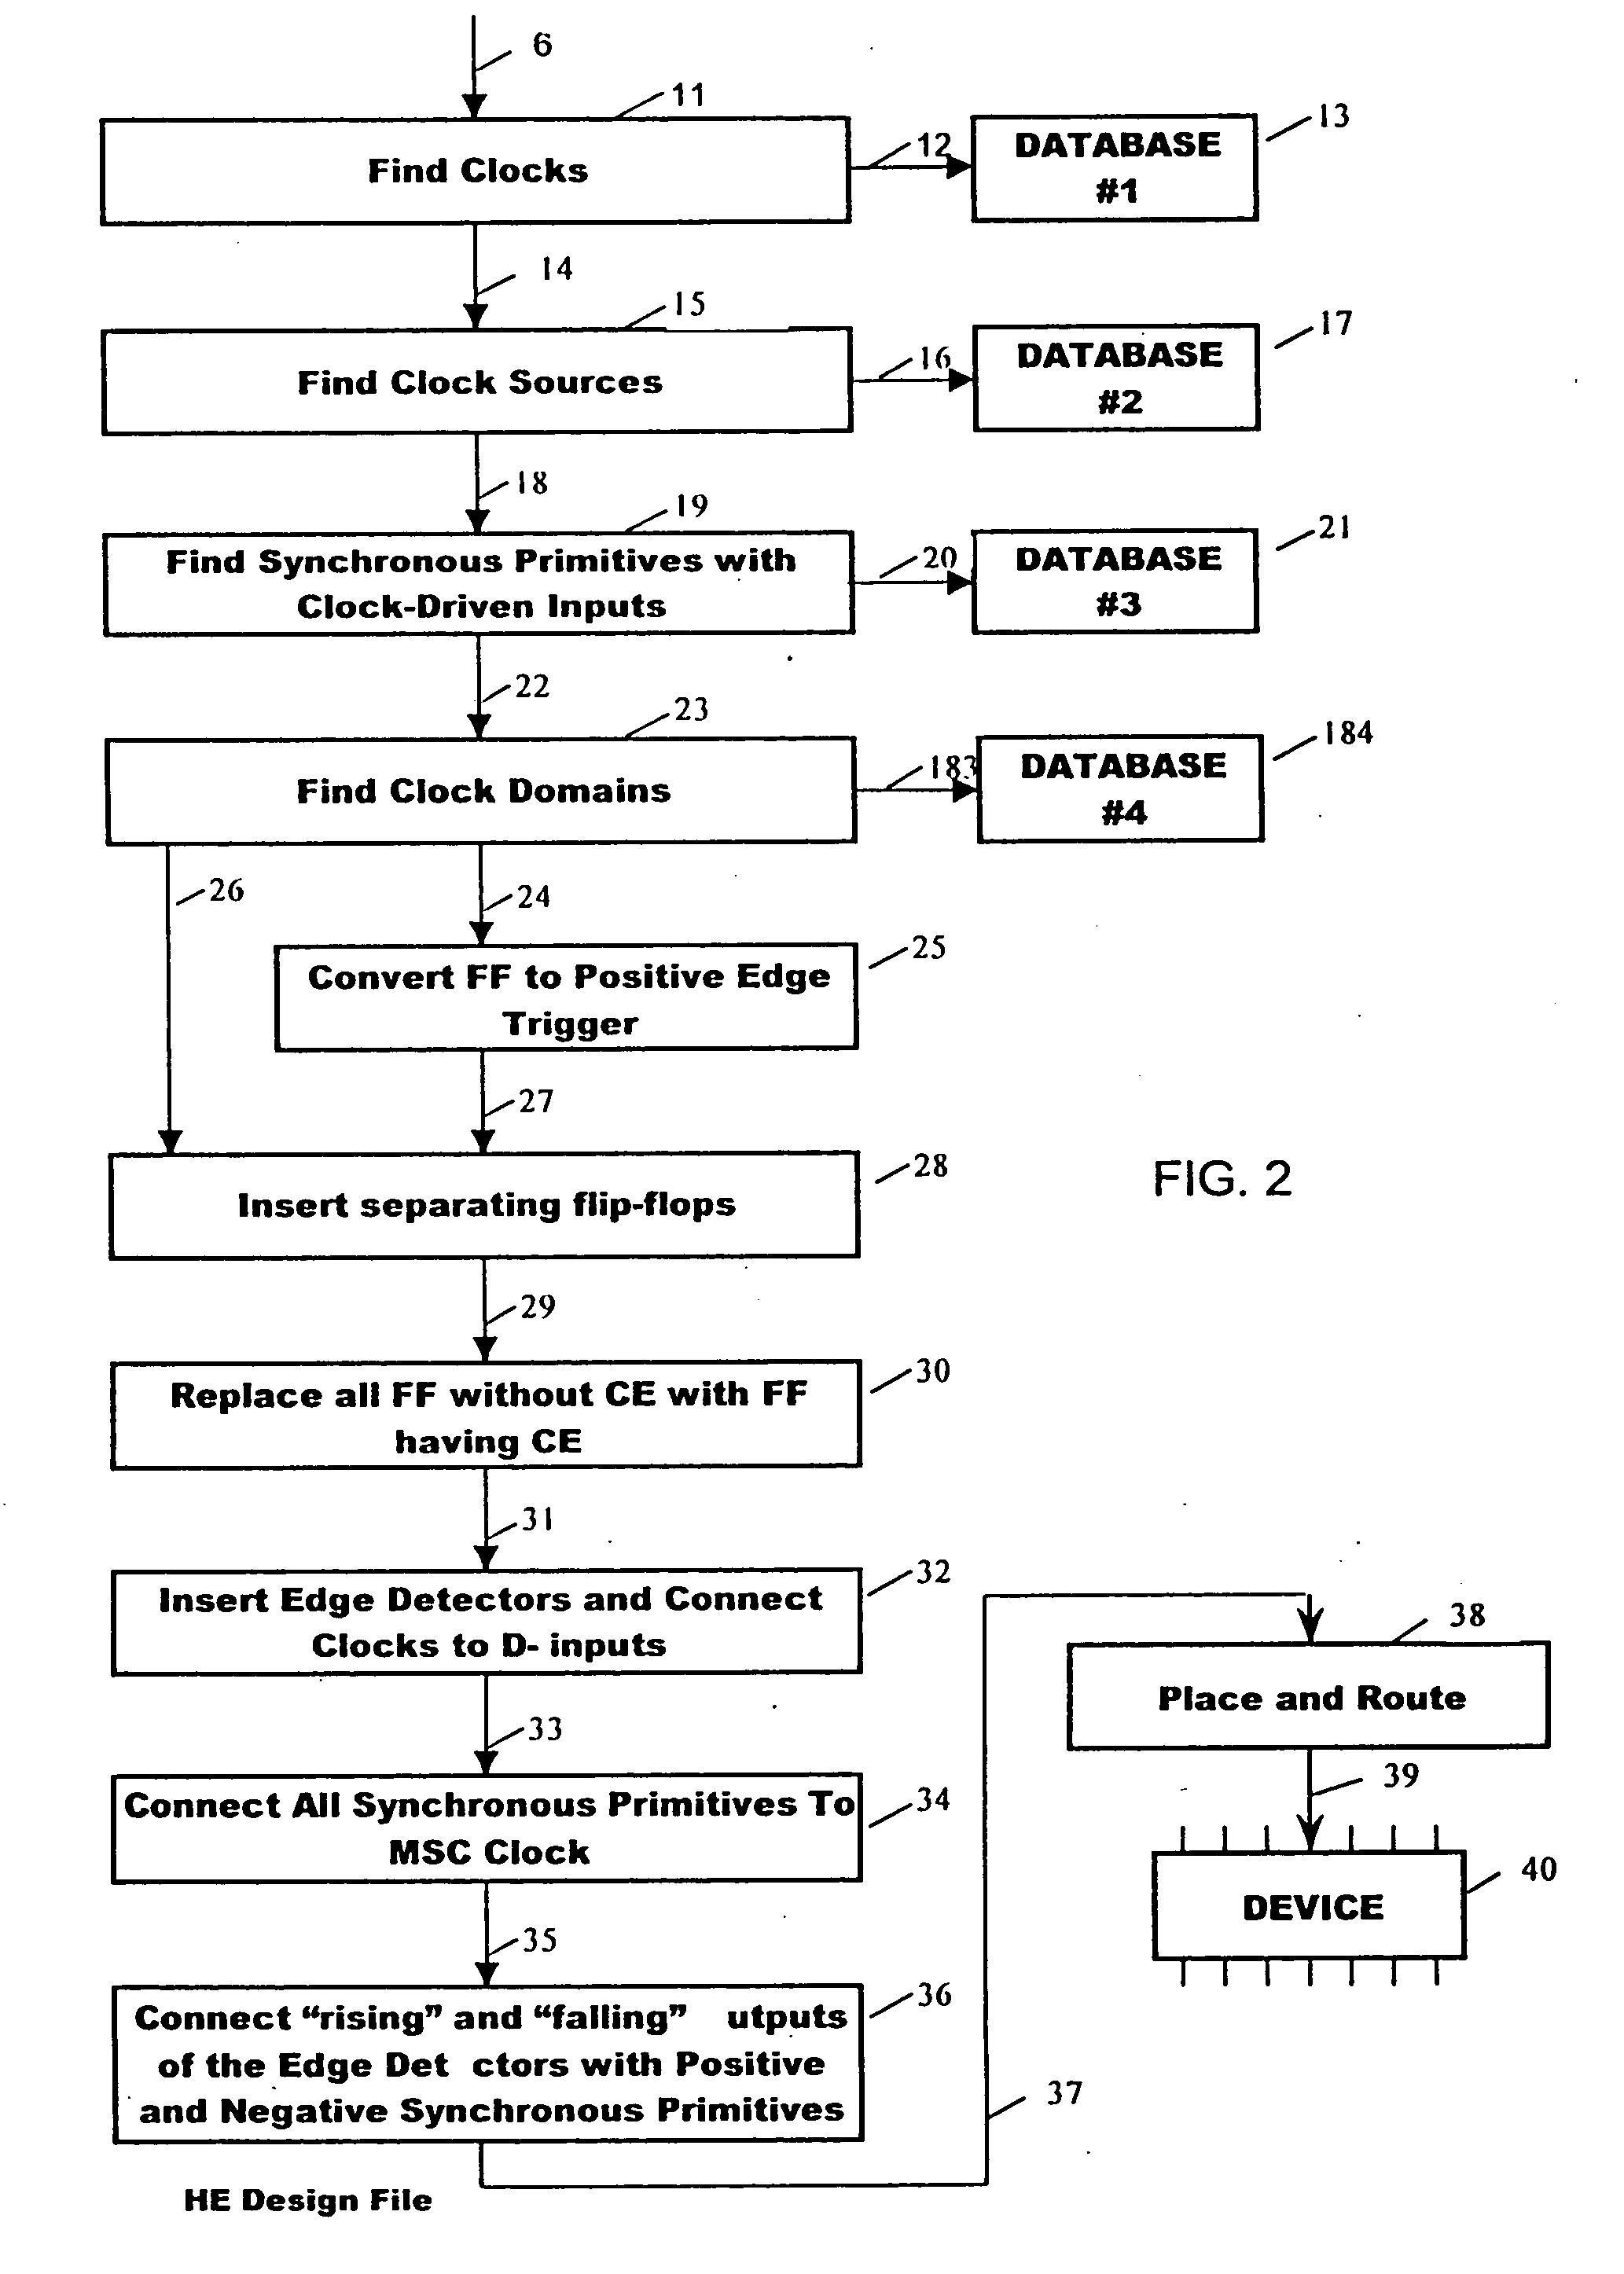 Method and apparatus for accelerating the verification of application specific integrated circuit designs